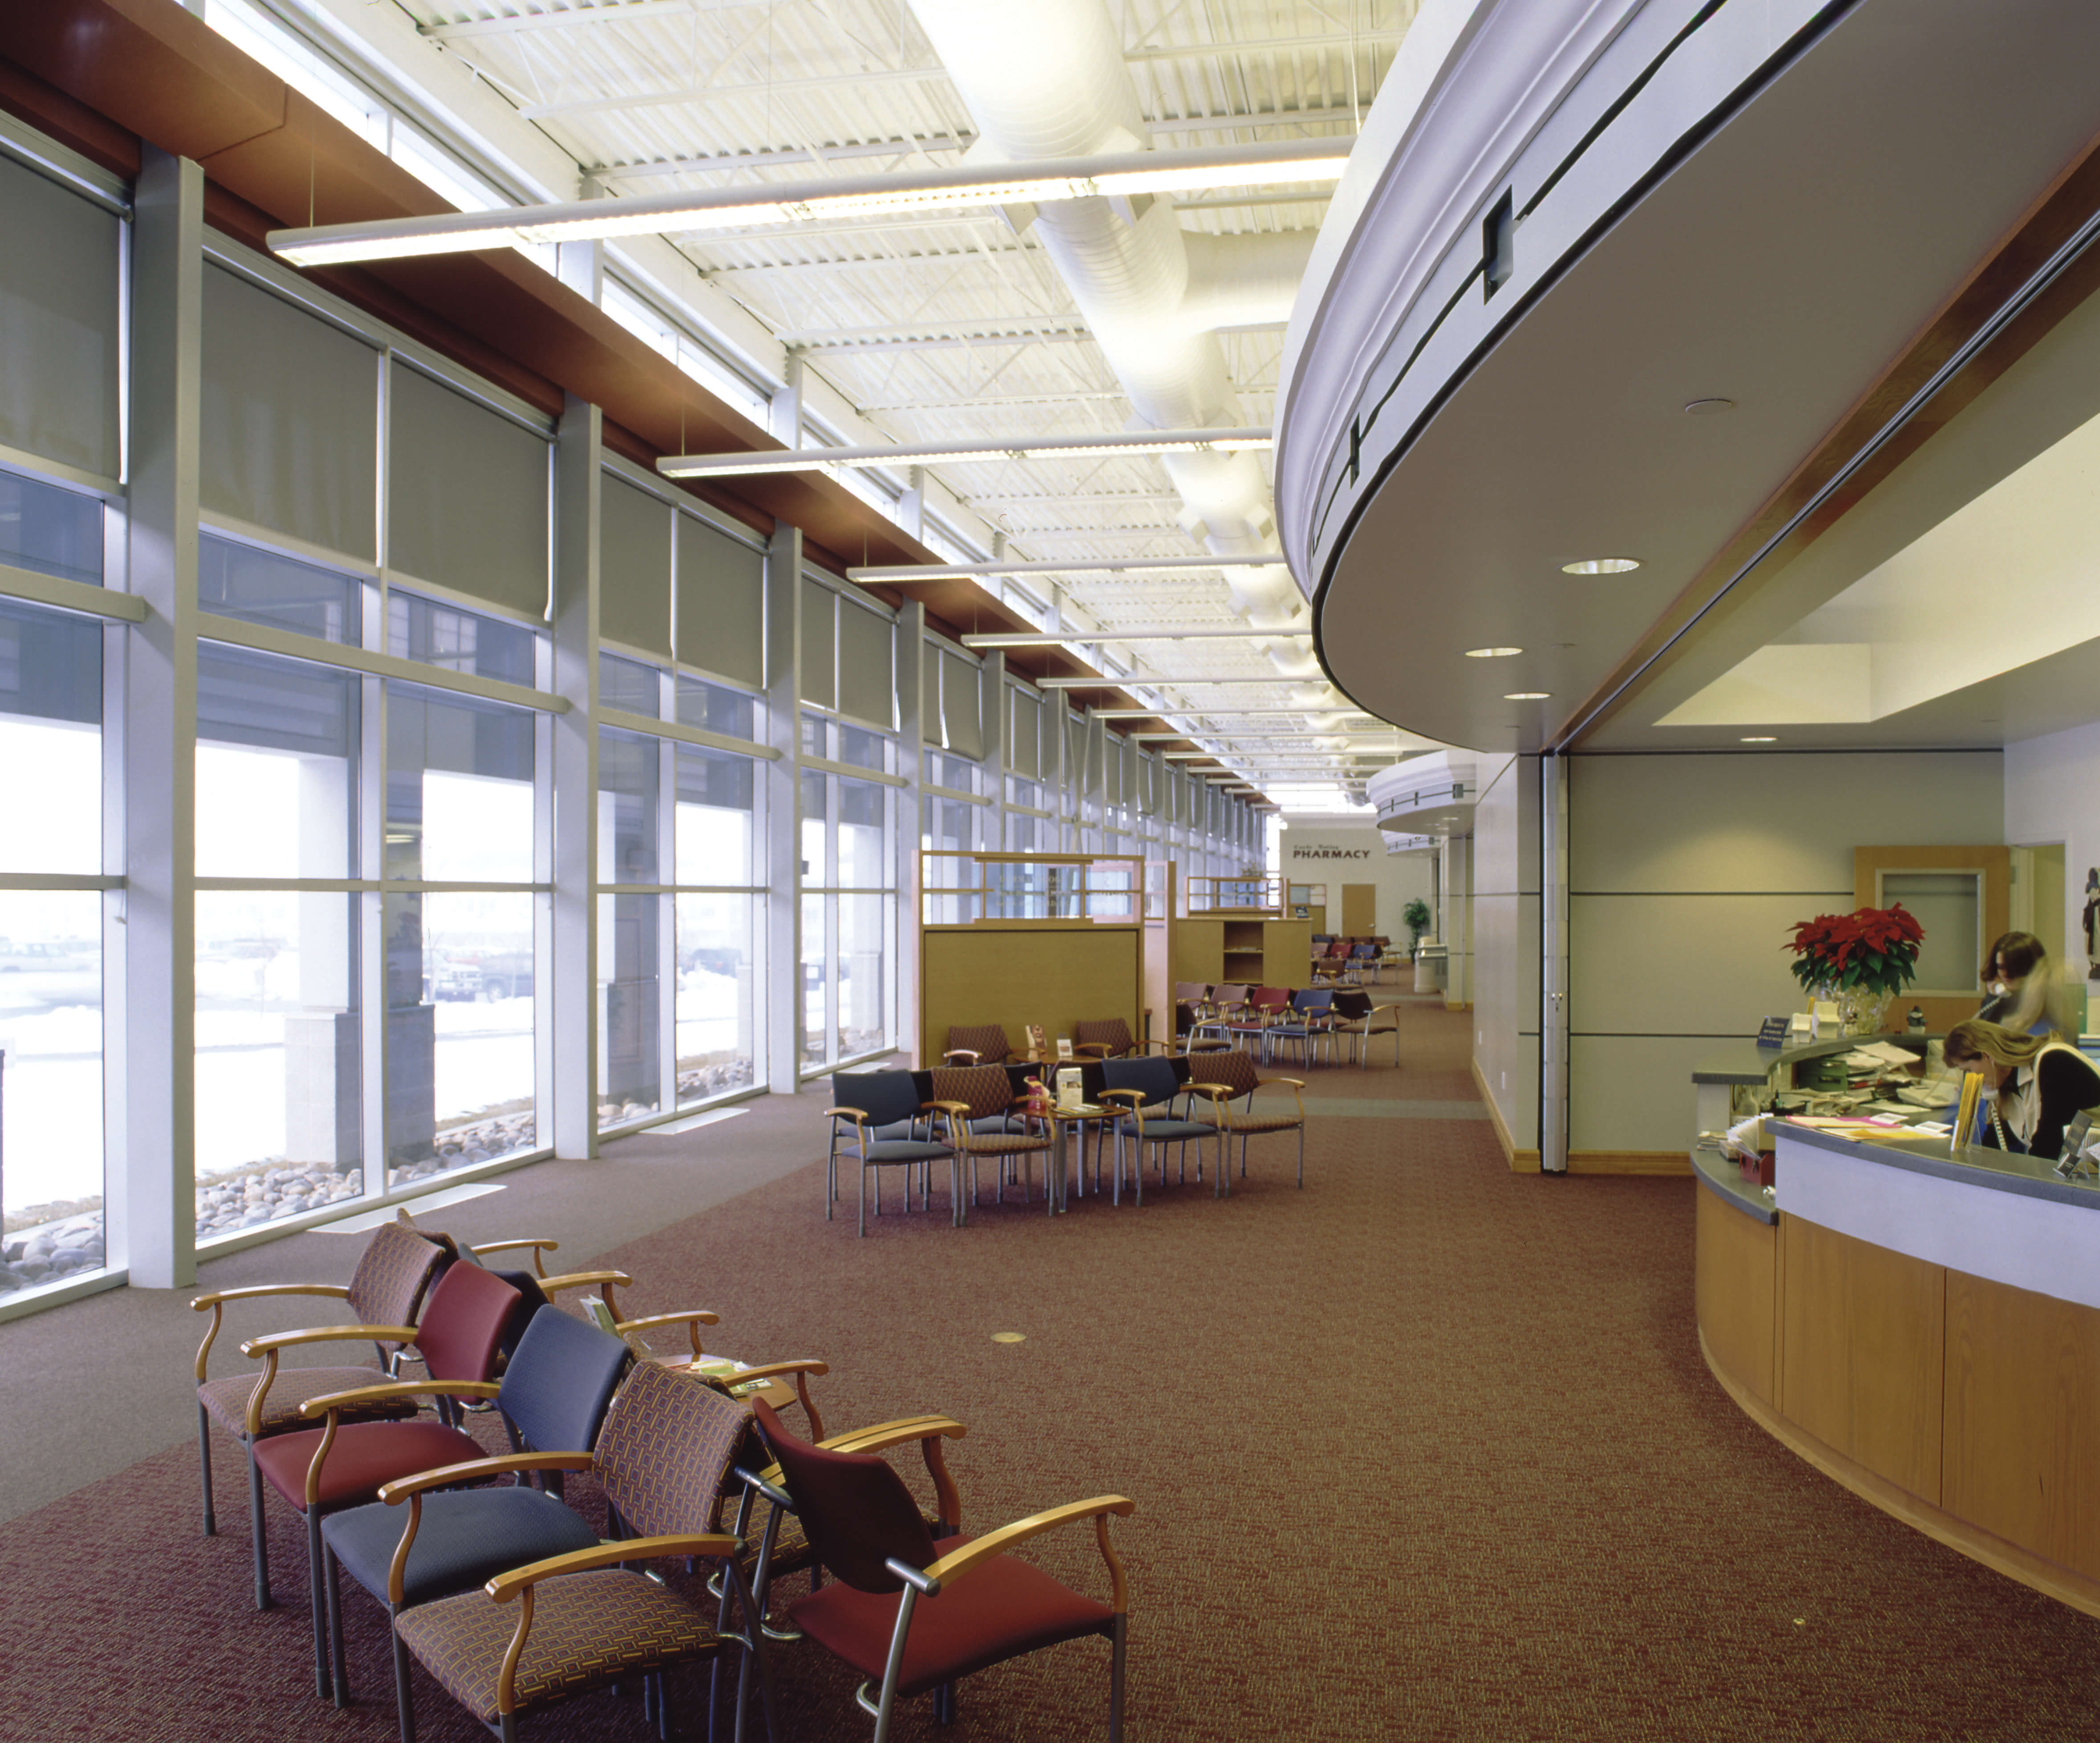 Waiting room after commercial cleaning Chem-Dry of Seattle Seattle (206)783-1003